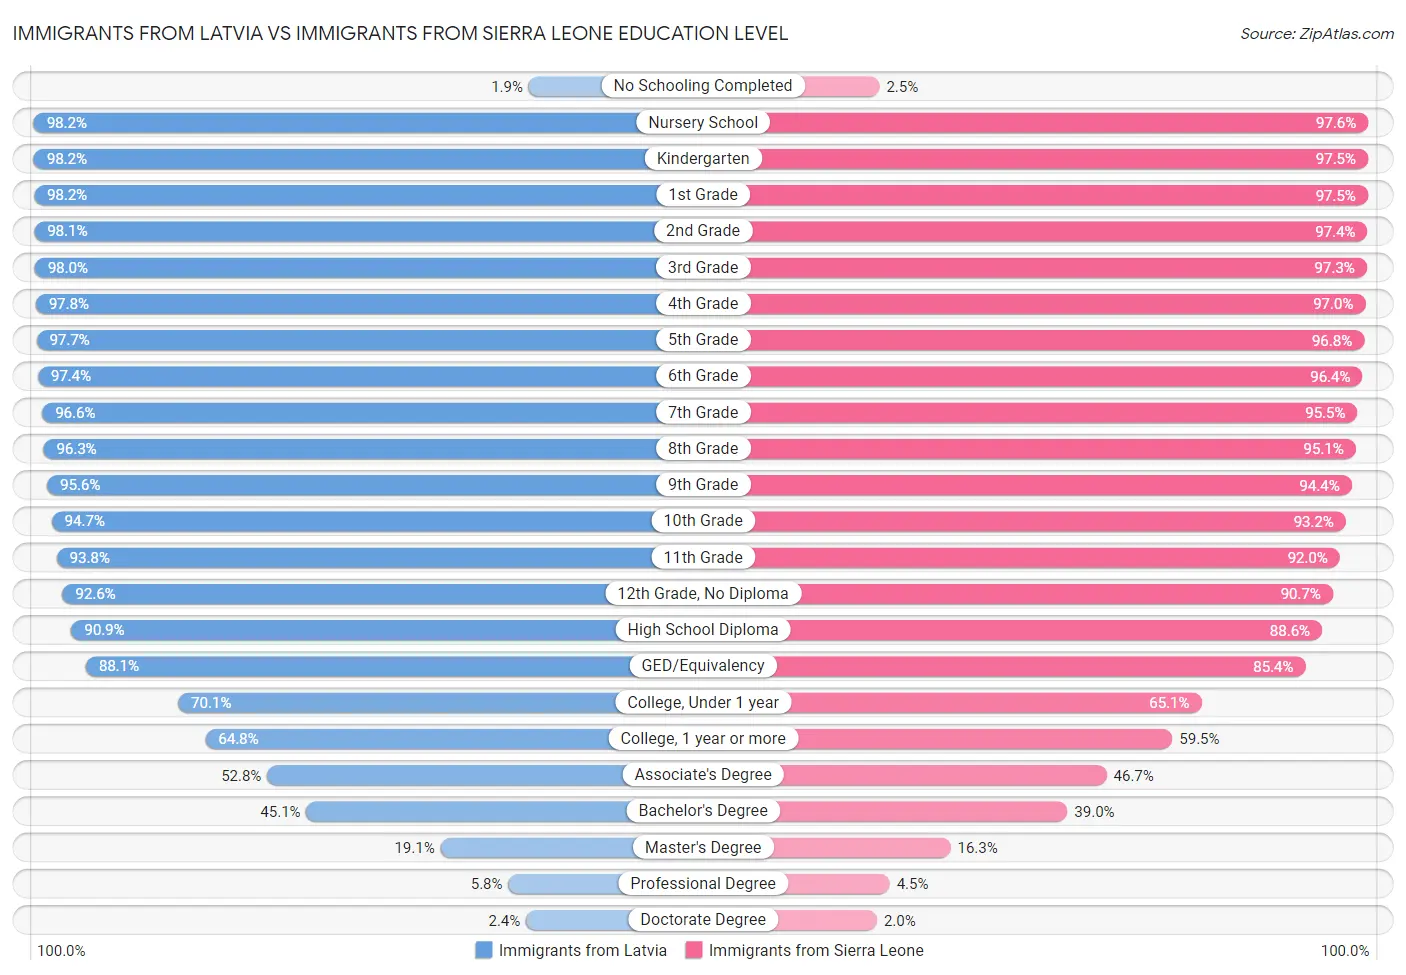 Immigrants from Latvia vs Immigrants from Sierra Leone Education Level